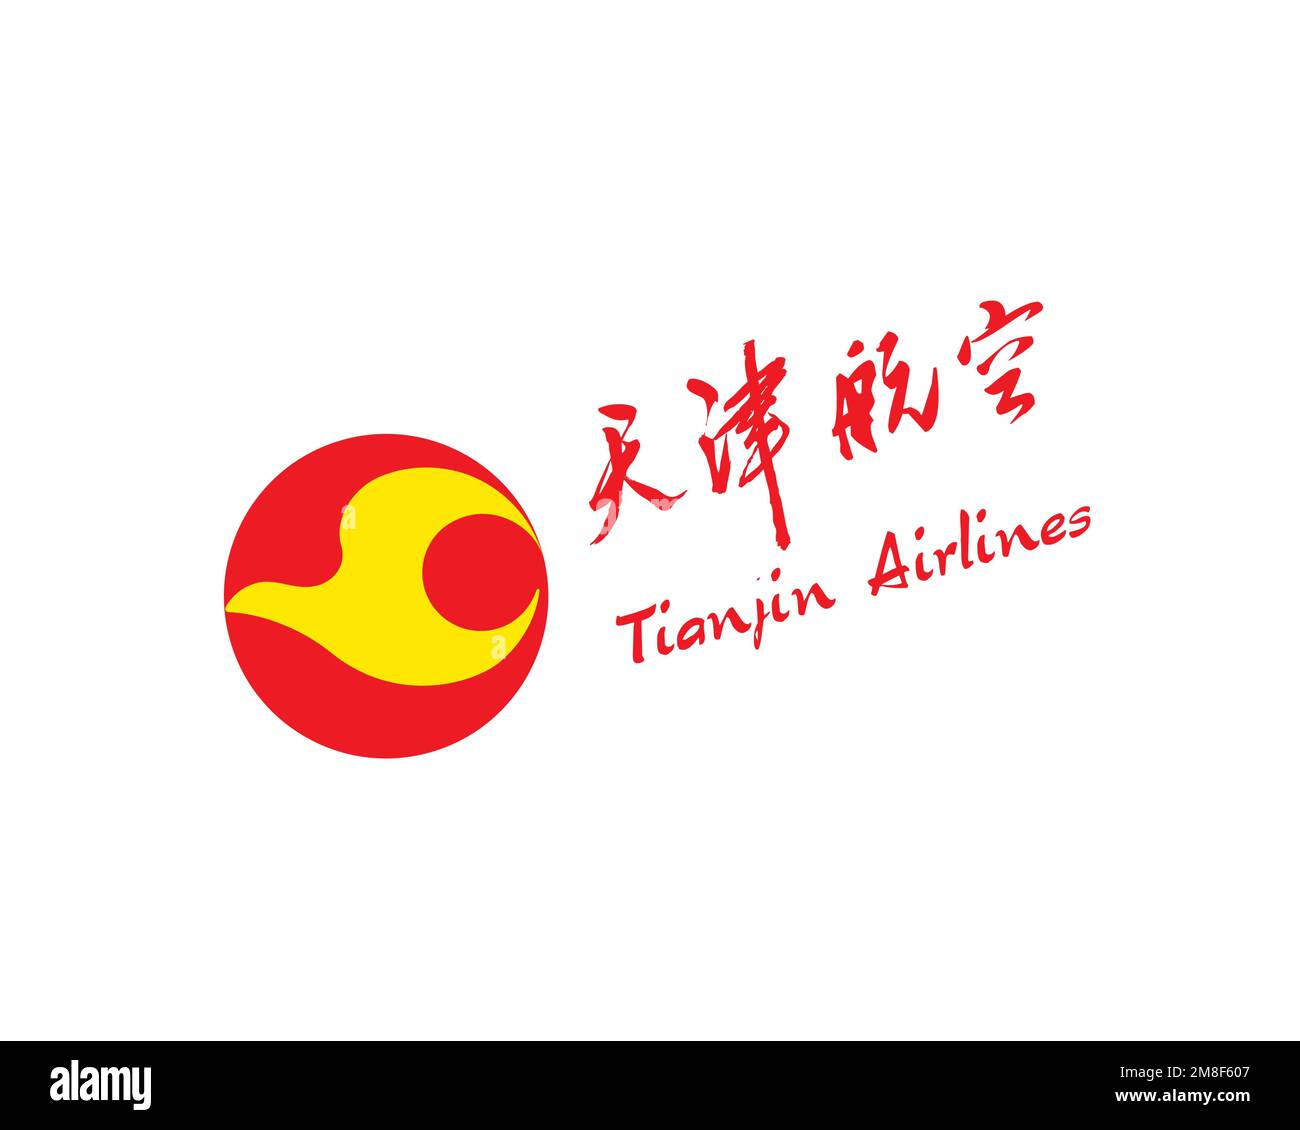 Tianjin Airline, rotated logo, white background Stock Photo - Alamy